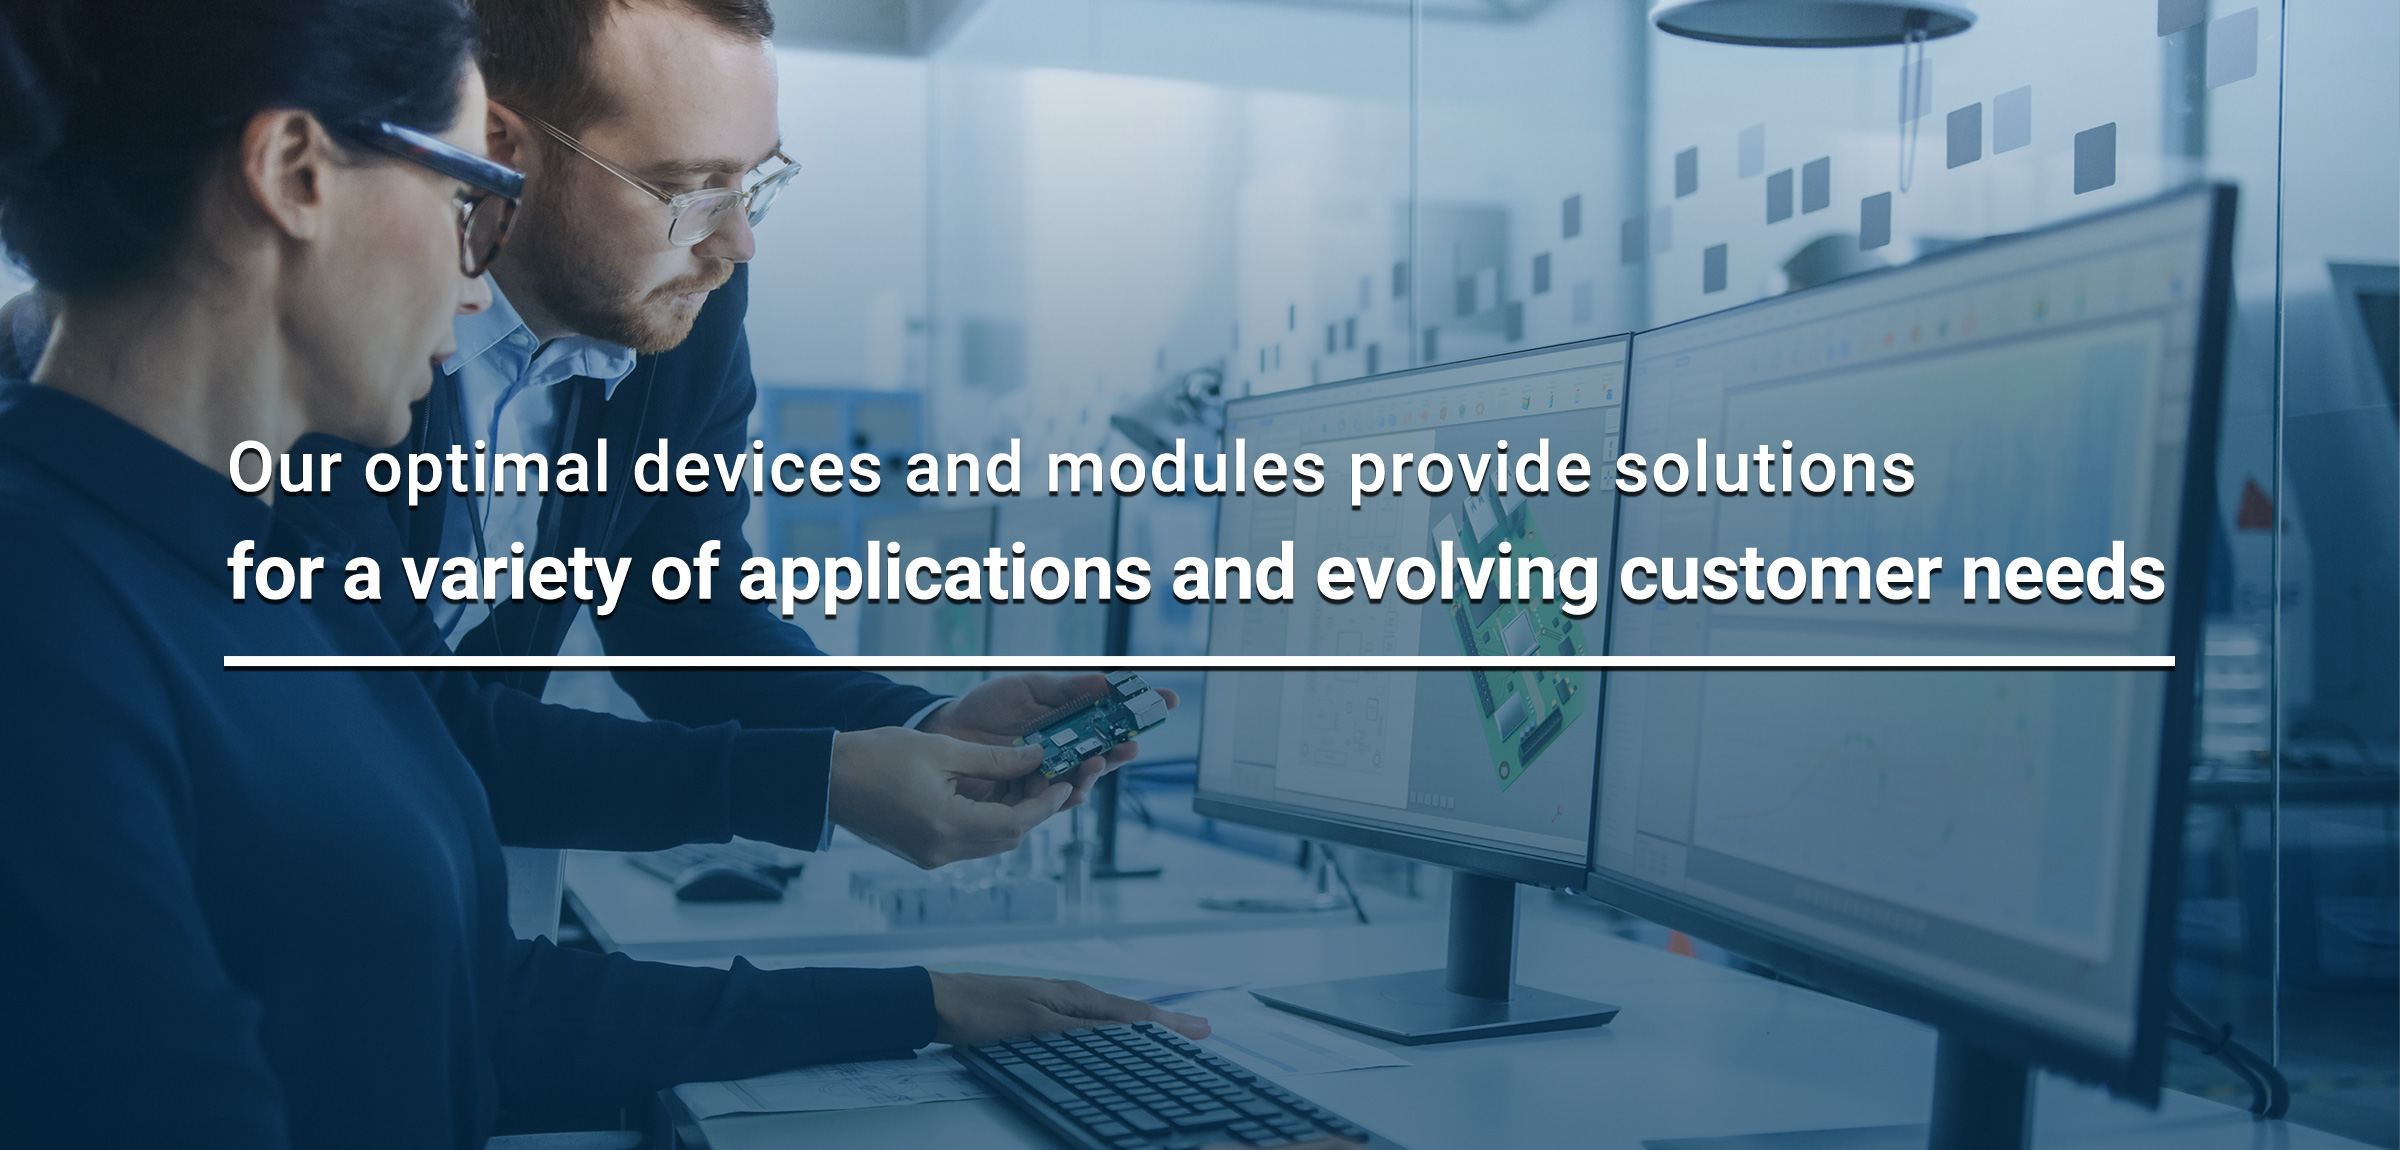 Our optimal devices and modules provide solutions for a variety of applications and evolving customer needs.